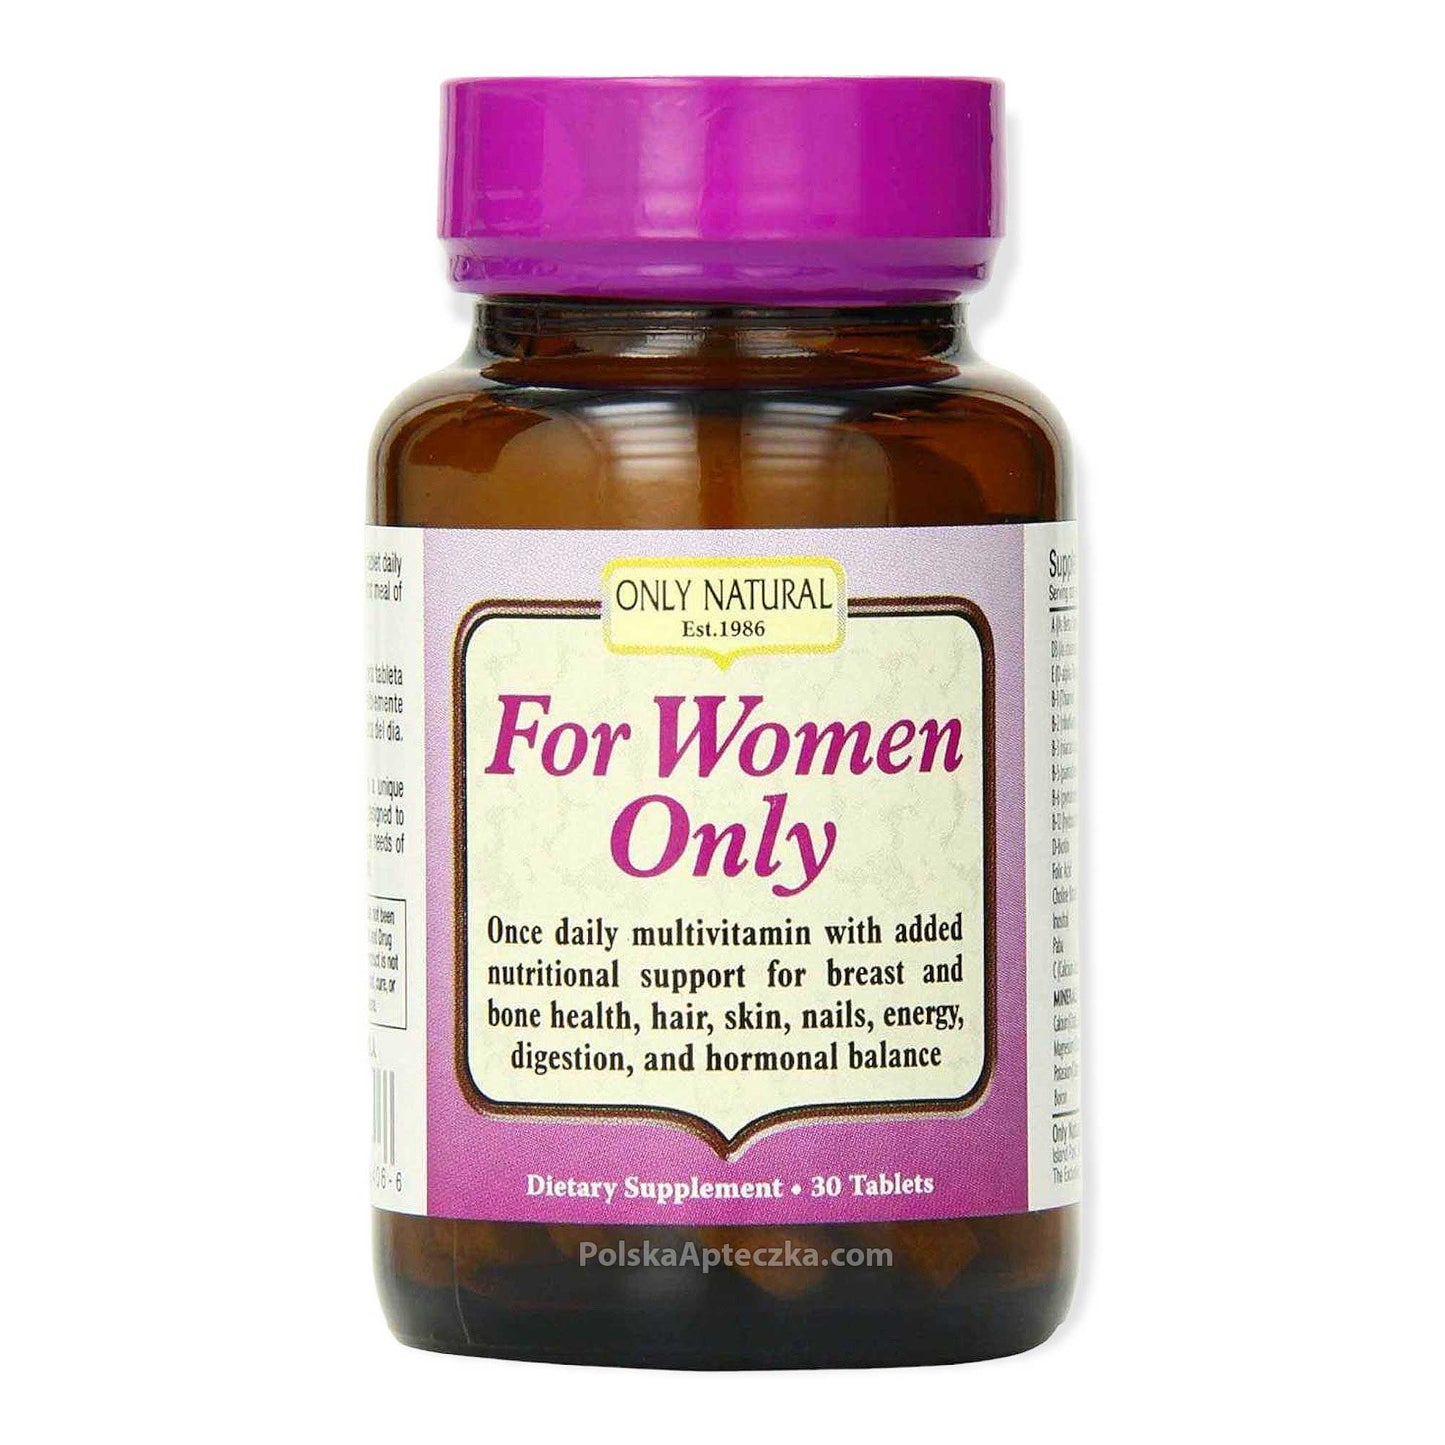 For Women Only Multiwitamina dla kobiet 30 tabl., Only Natural